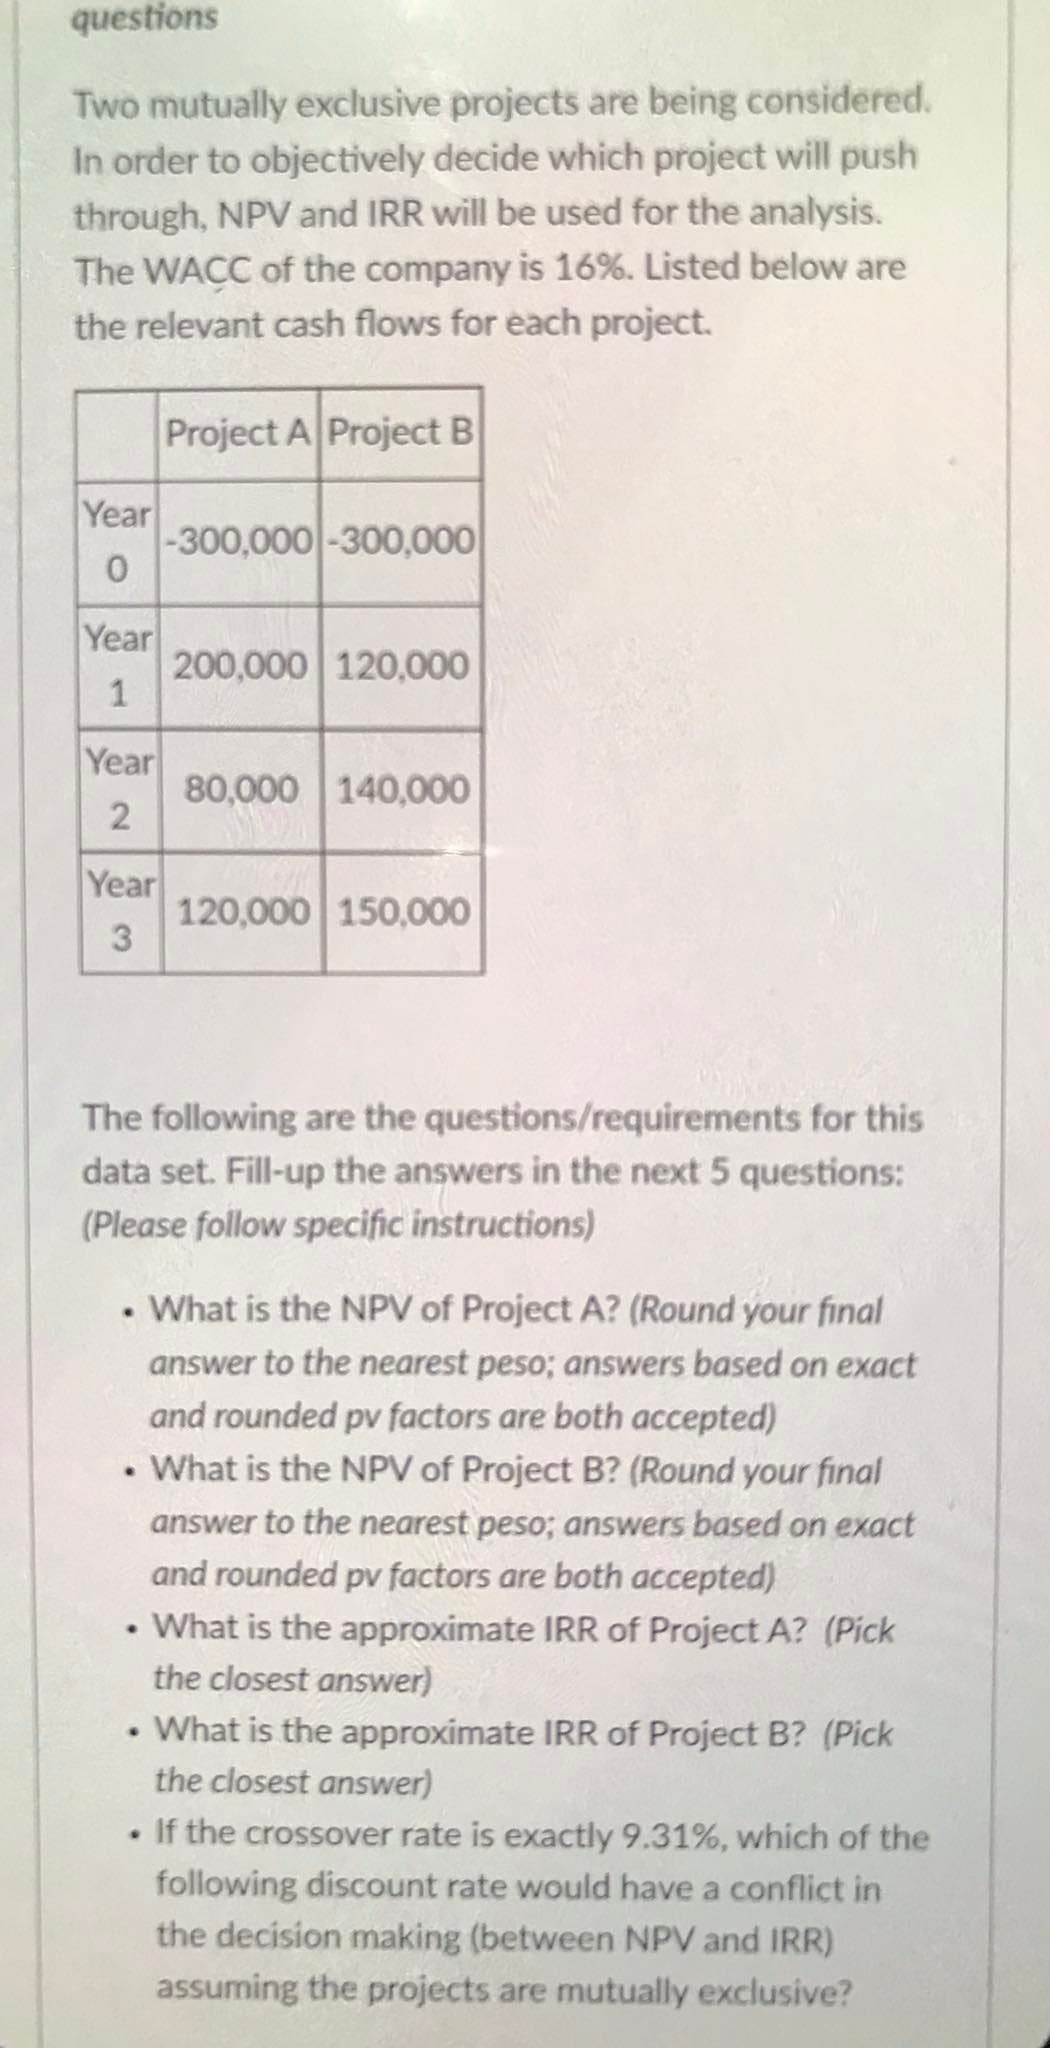 questions
Two mutually exclusive projects are being considered.
In order to objectively decide which project will push
through, NPV and IRR will be used for the analysis.
The WACC of the company is 16%. Listed below are
the relevant cash flows for each project.
Project A Project B
Year
-300,000 -300,000
Year
200,000 120,000
1
Year
80,000 140,000
Year
120,000 150,000
3
The following are the questions/requirements for this
data set. Fill-up the answers in the next 5 questions:
(Please follow specific instructions)
• What is the NPV of Project A? (Round your final
answer to the nearest peso; answers based on exact
and rounded pv factors are both accepted)
• What is the NPV of Project B? (Round your final
answer to the nearest peso; answers based on exact
and rounded pv factors are both accepted)
• What is the approximate IRR of Project A? (Pick
the closest answer)
• What is the approximate IRR of Project B? (Pick
the closest answer)
If the crossover rate is exactly 9.31%, which of the
following discount rate would have a conflict in
the decision making (between NPV and IRR)
assuming the projects are mutually exclusive?
2.
